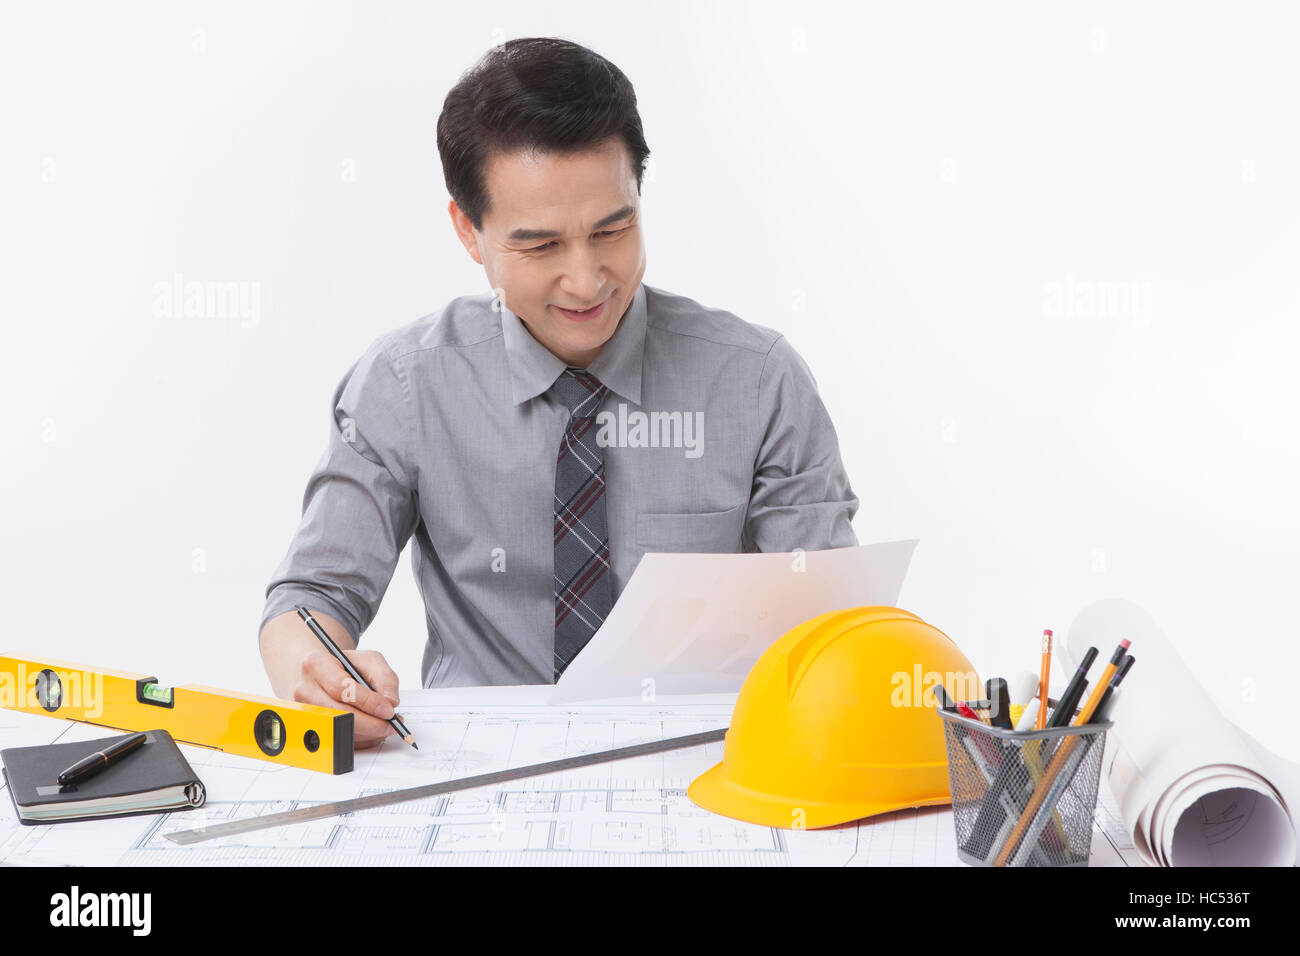 Portrait of smiling middle aged architect Stock Photo